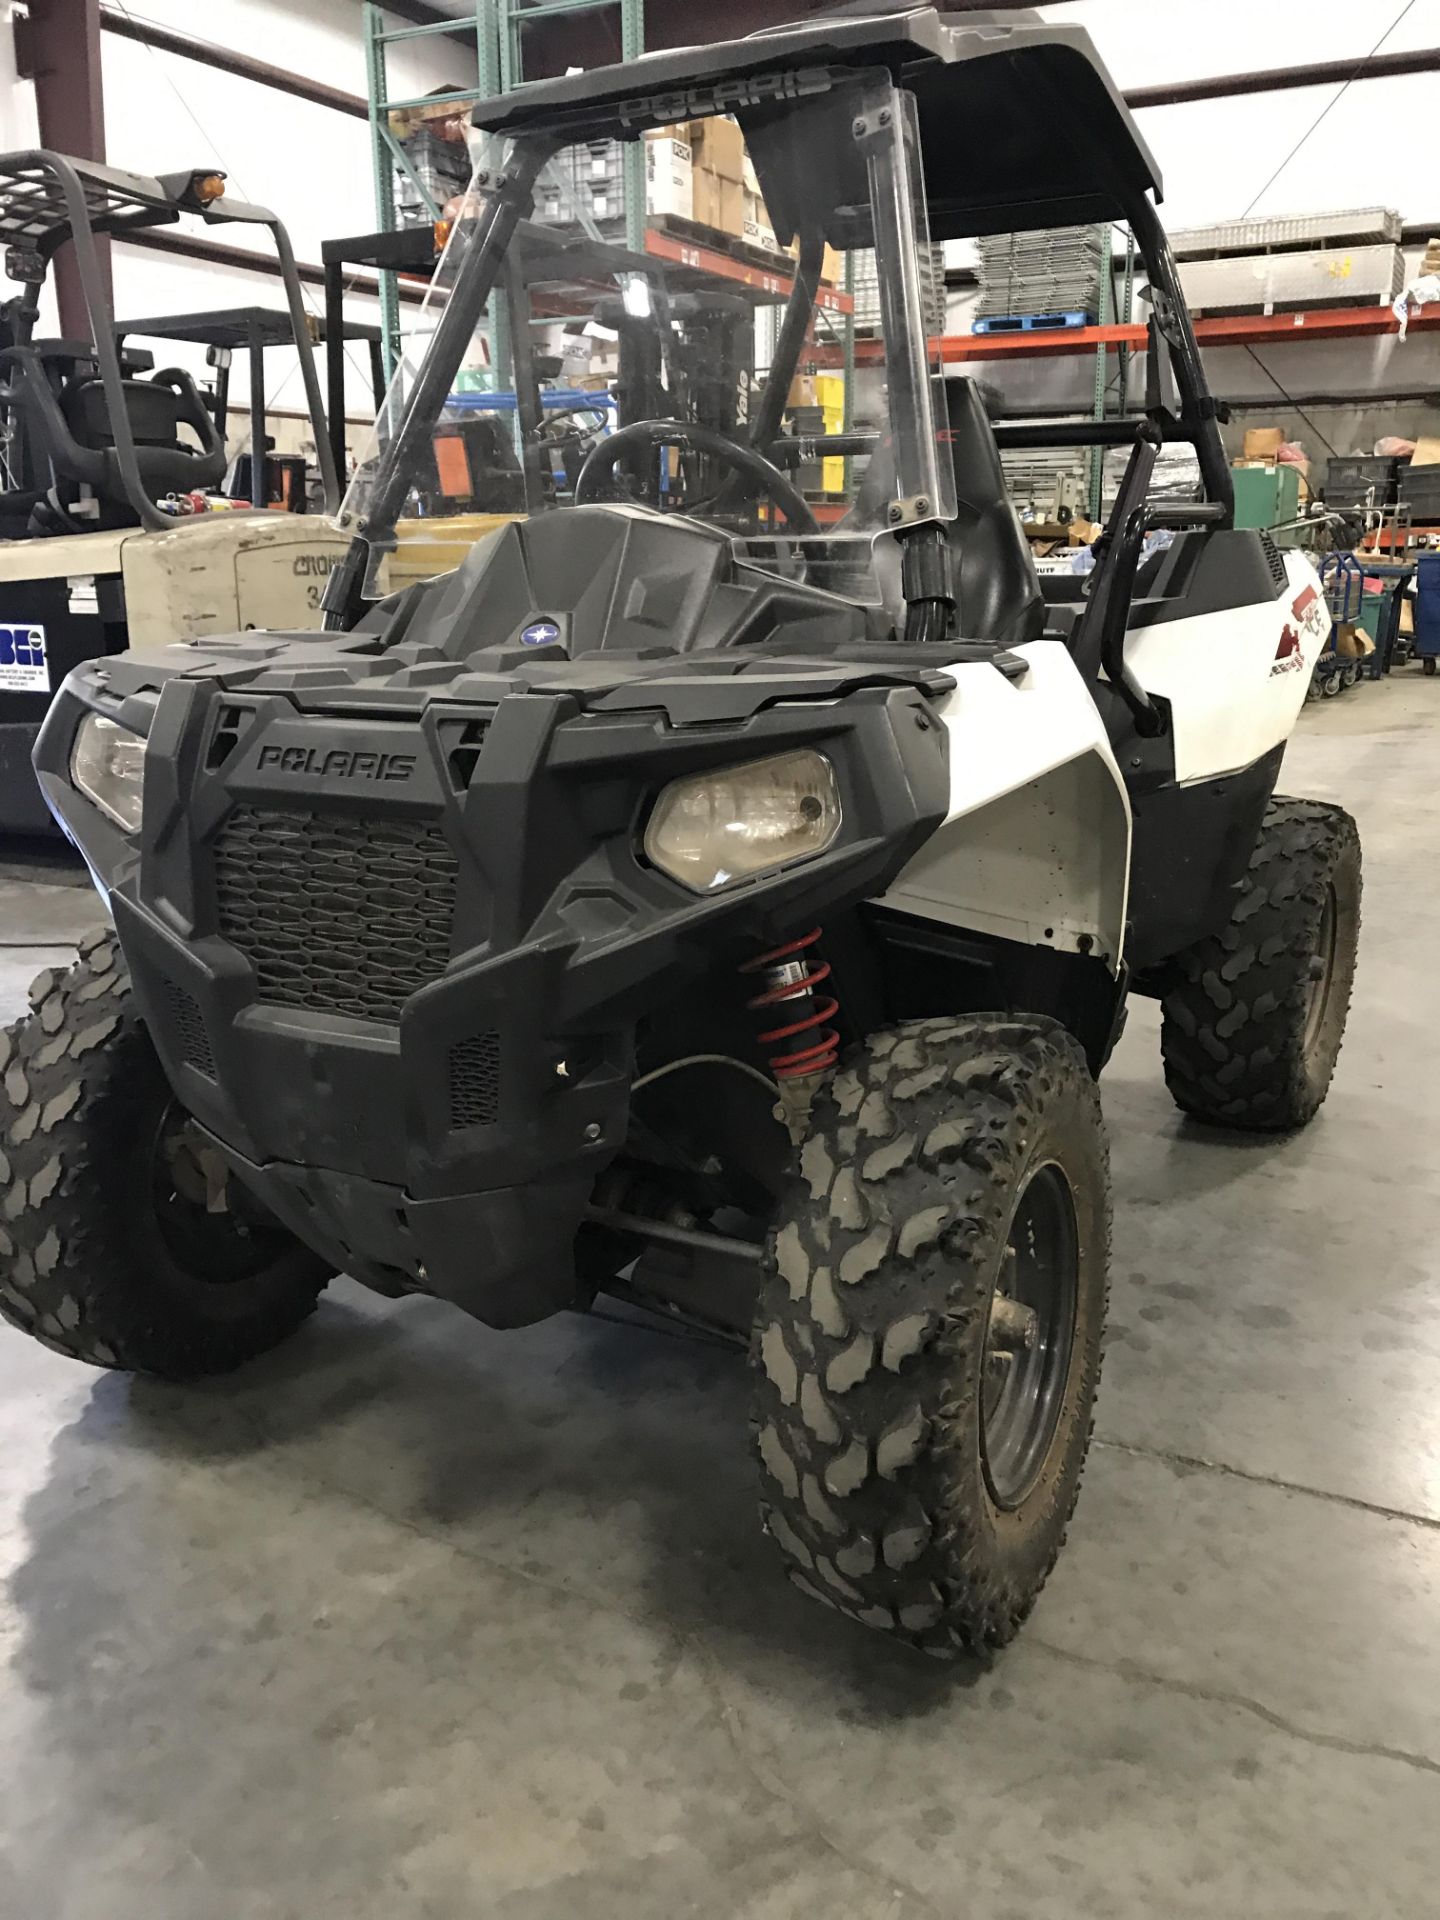 SEE VIDEO ** 2014 POLARIS ACE ATV, 631.8 HOURS SHOWING